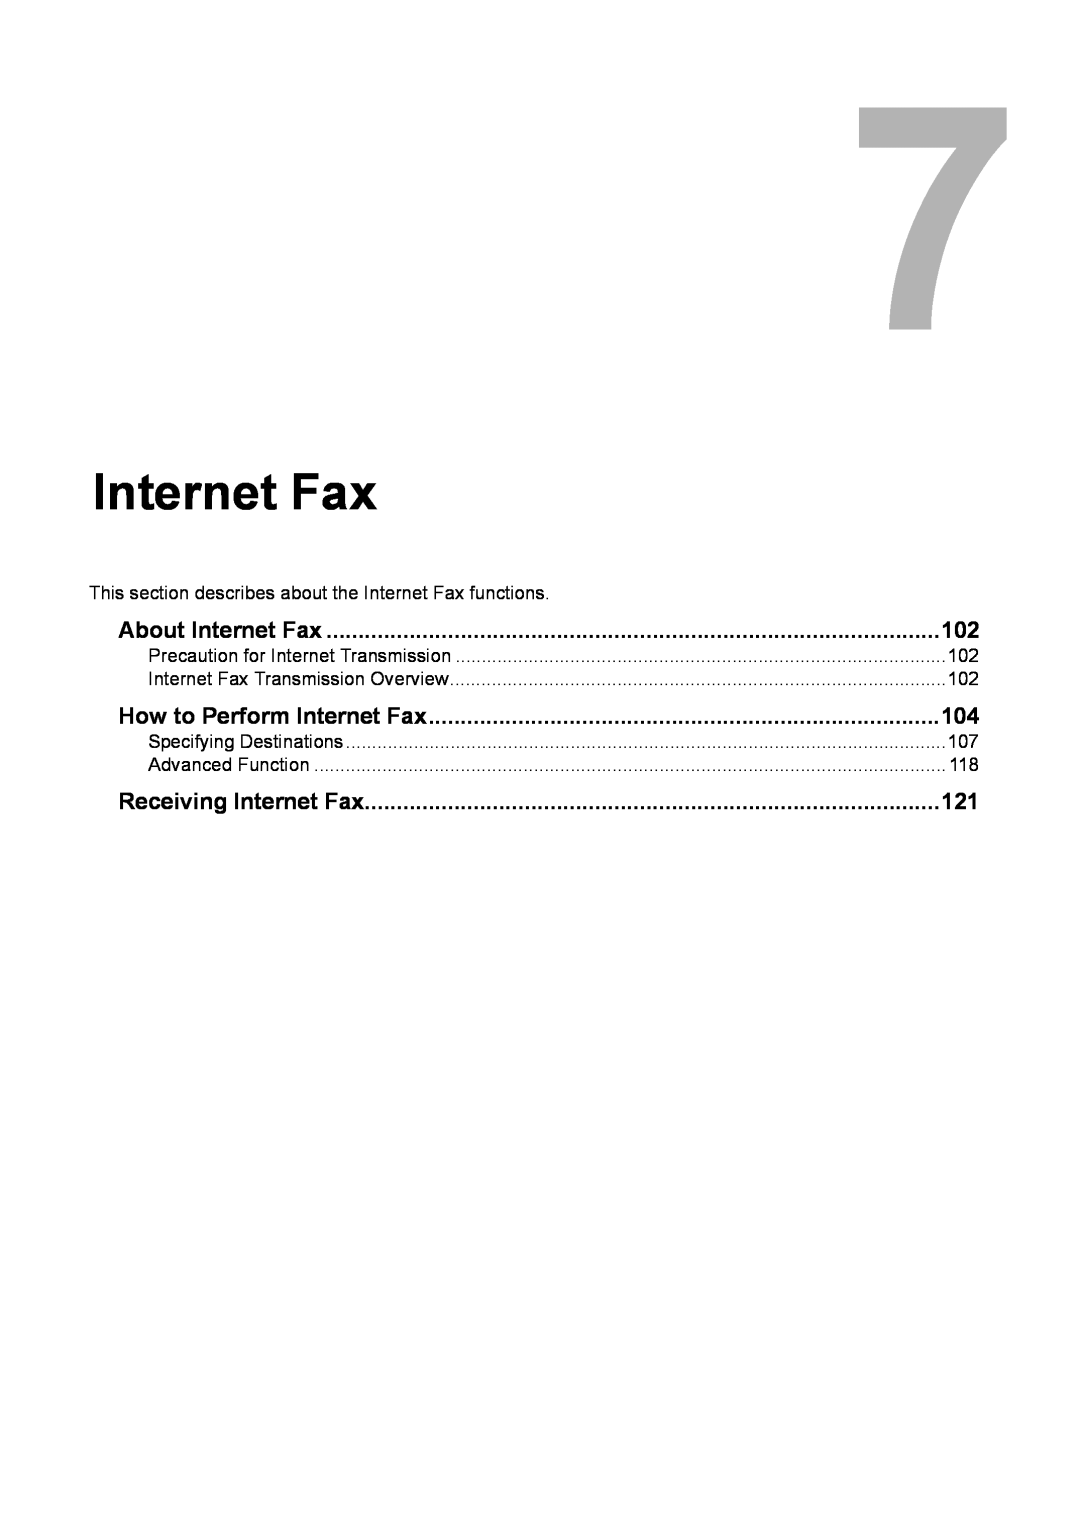 Toshiba 2500C, 3500C, 3510C manual About Internet Fax, How to Perform Internet Fax, Receiving Internet Fax 